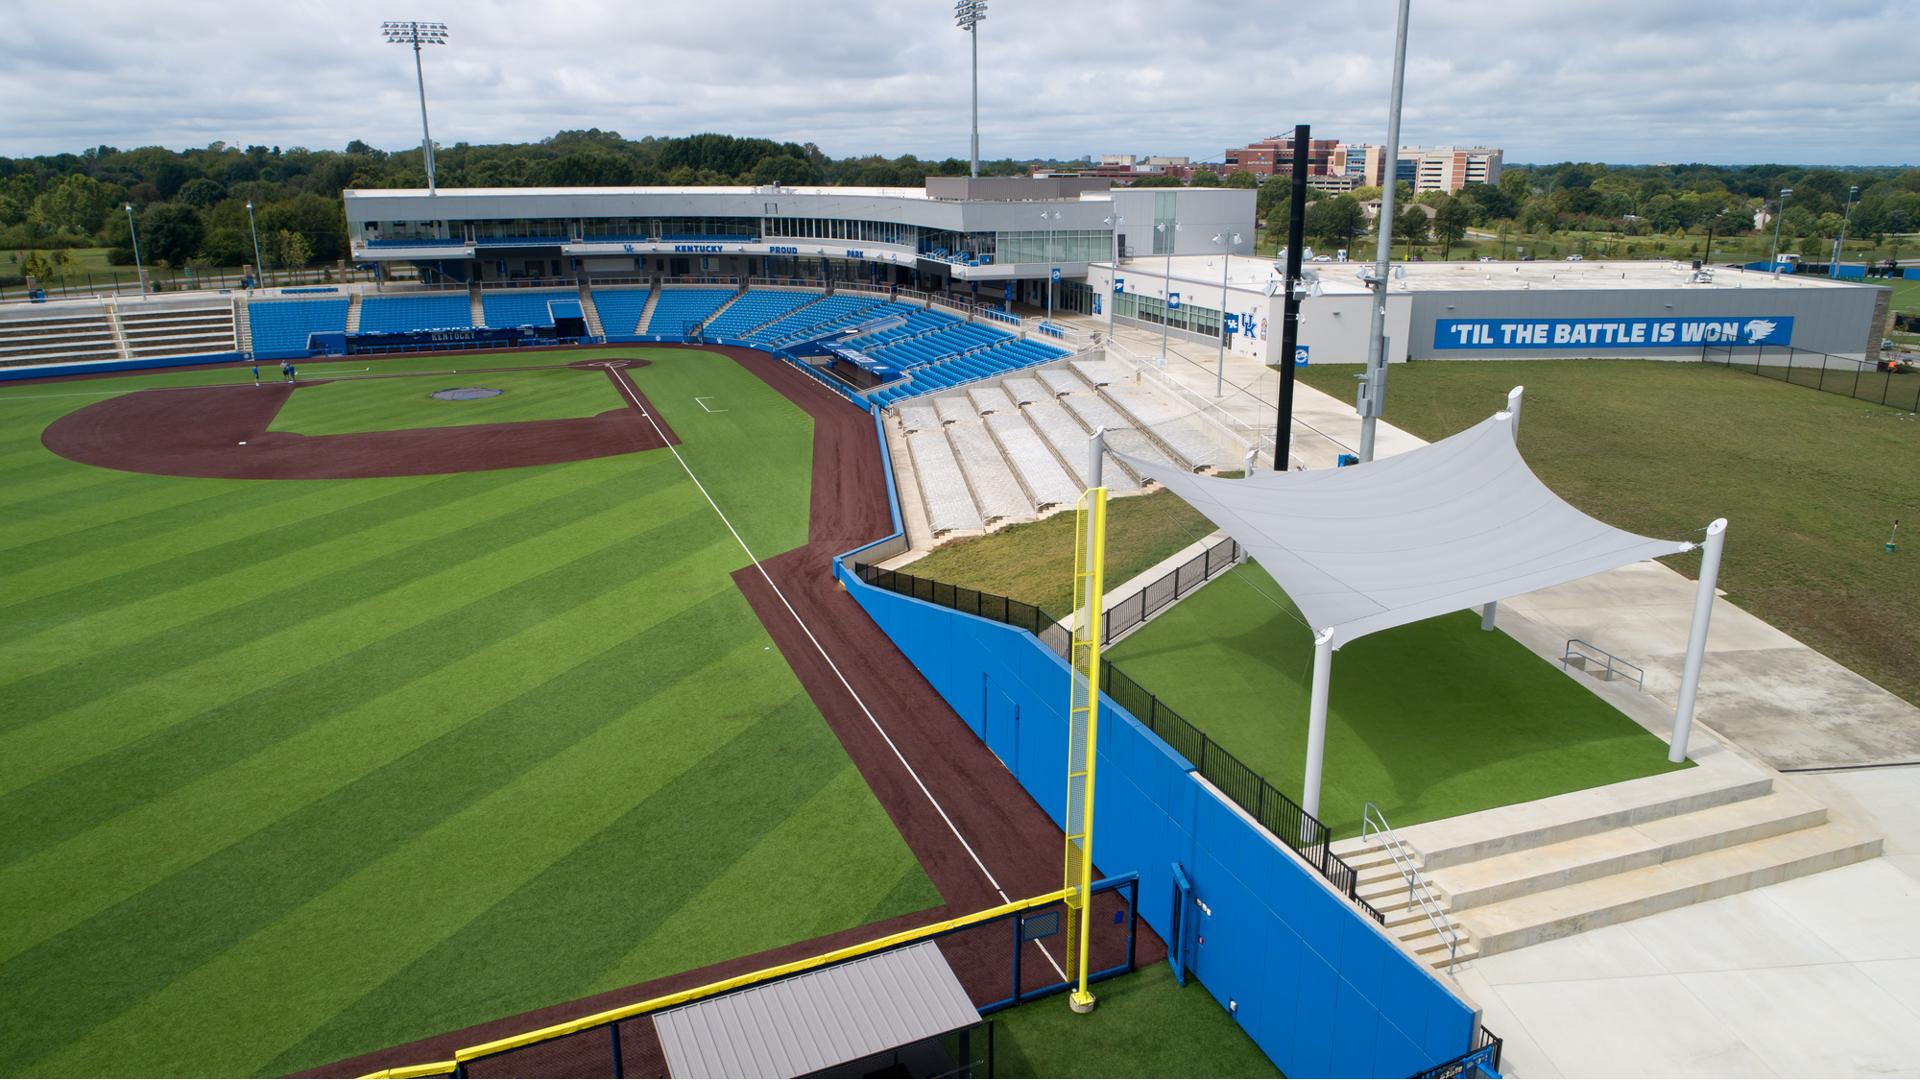 University of Kentucky Baseball field featuring a new  addition...a SkyWays shade canopy to to cool off the foul  zone.